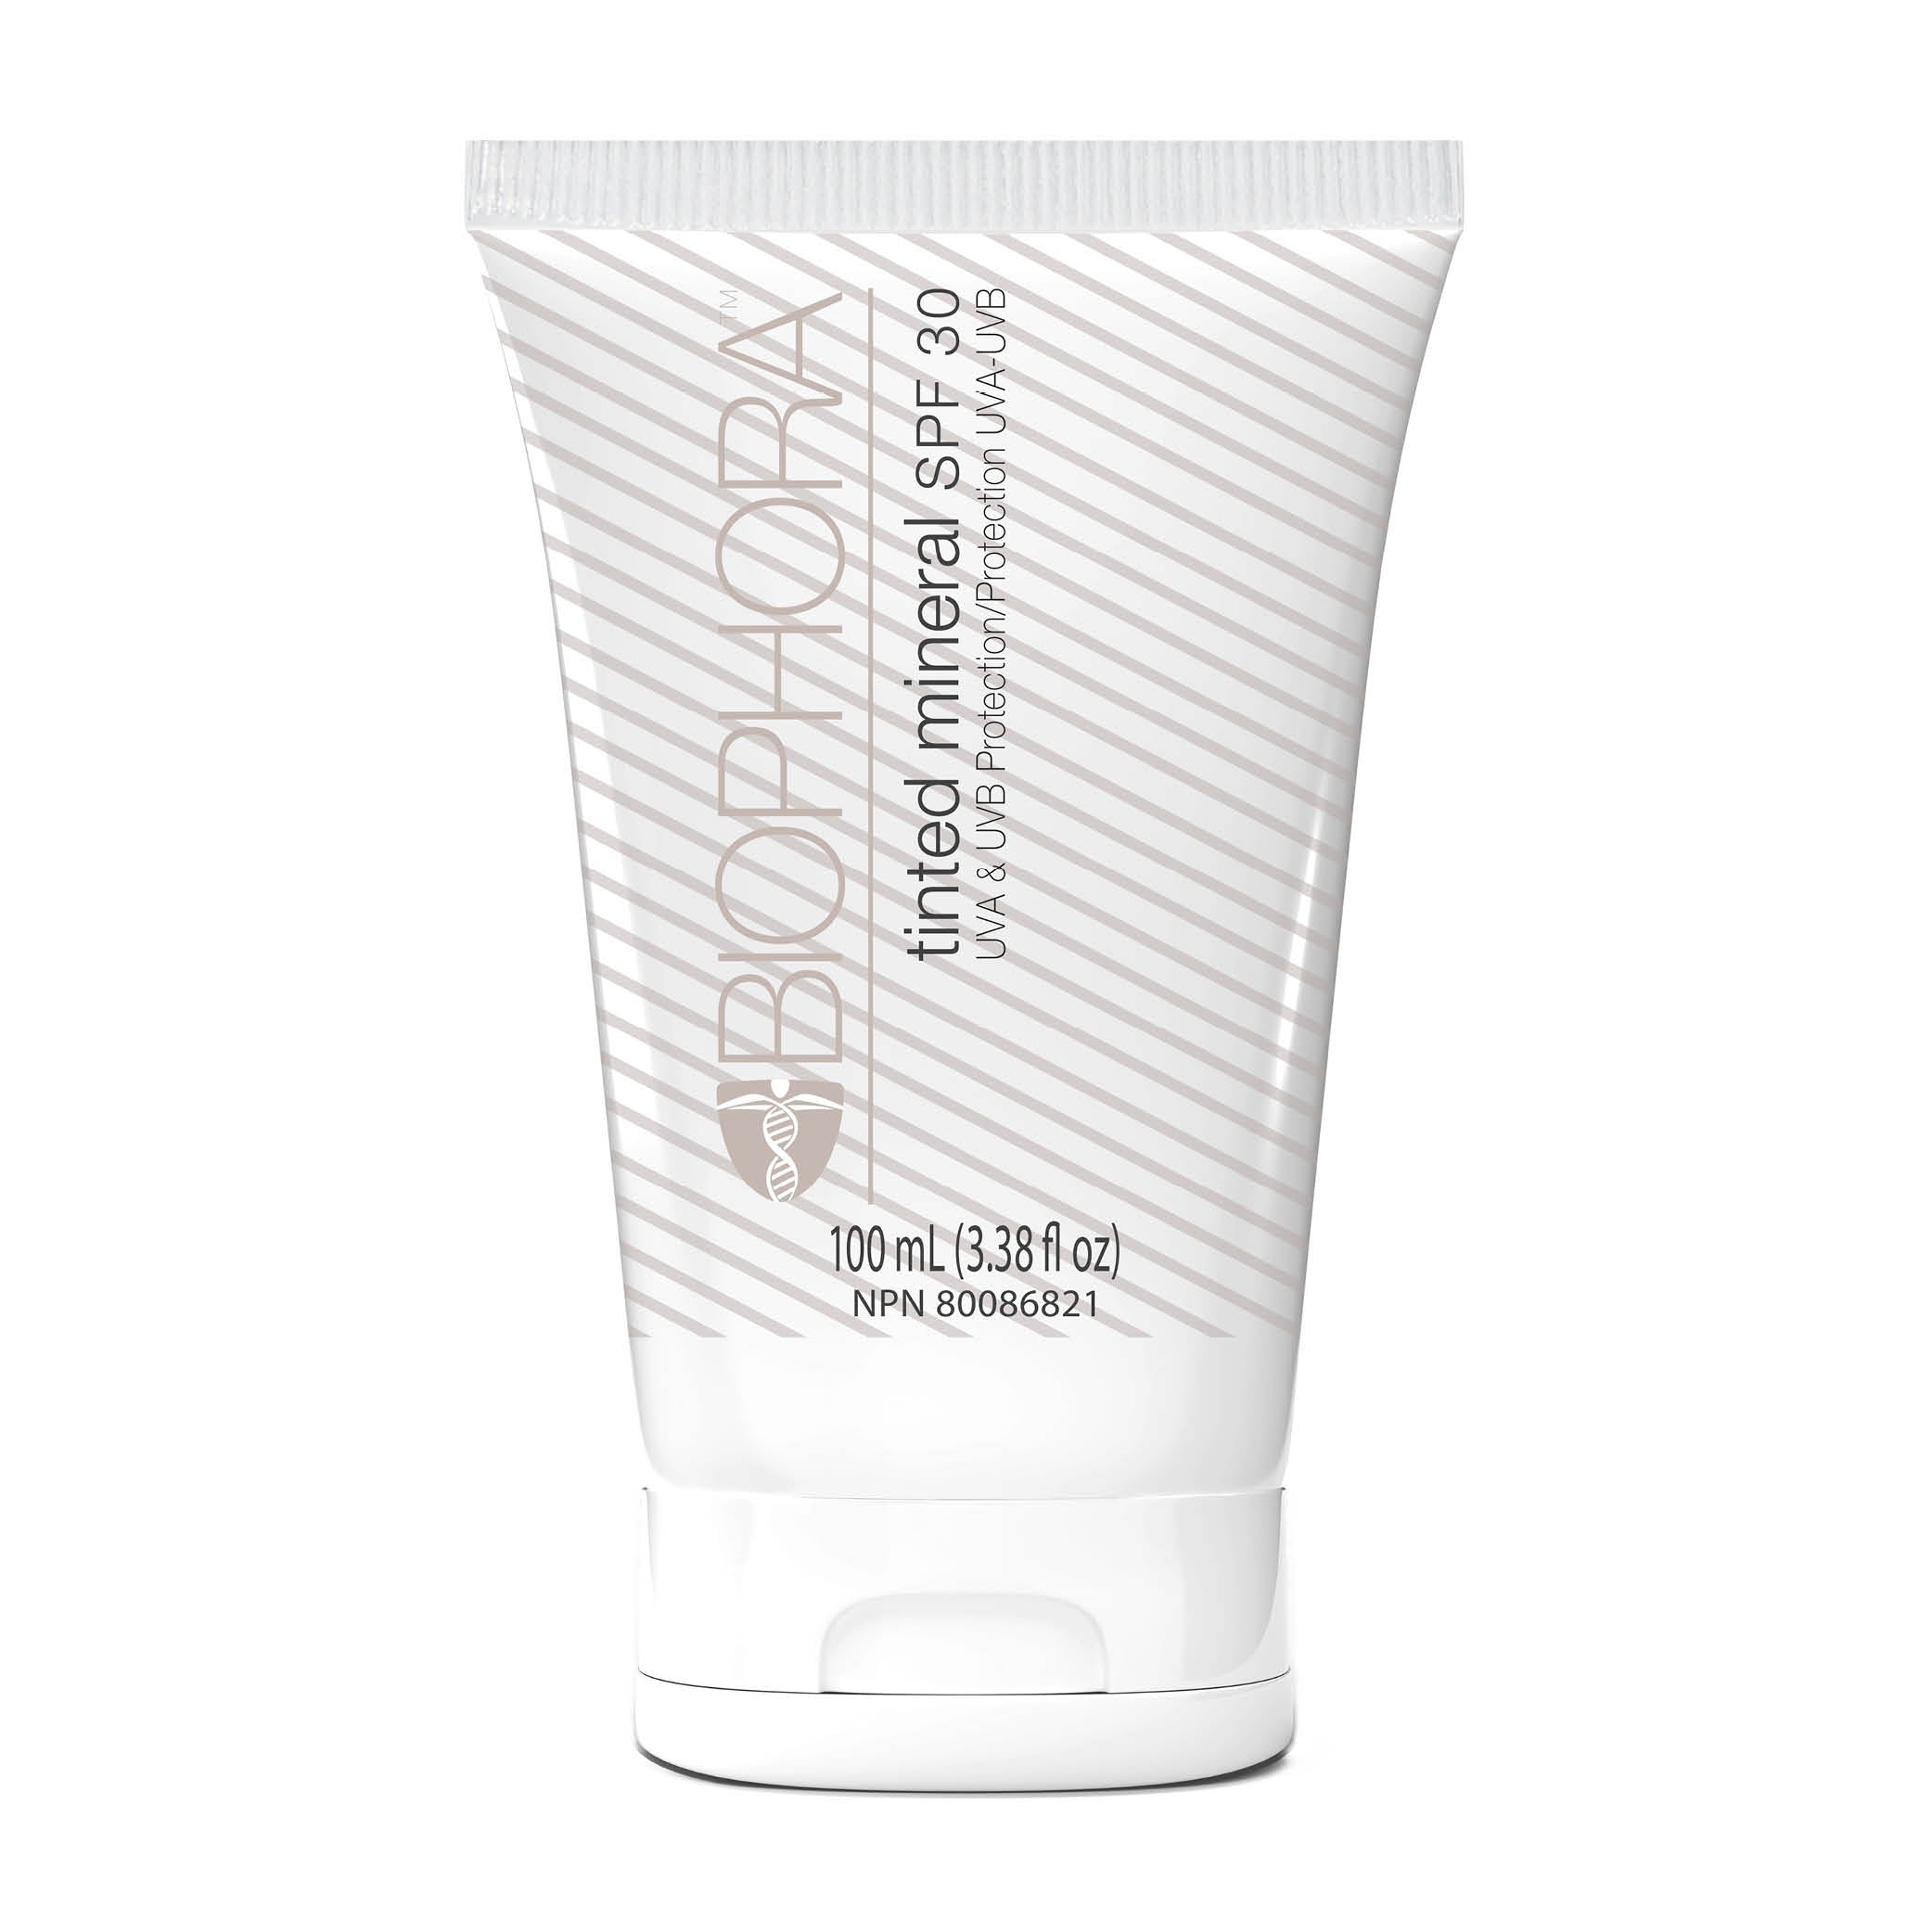 Tinted Mineral SPF30